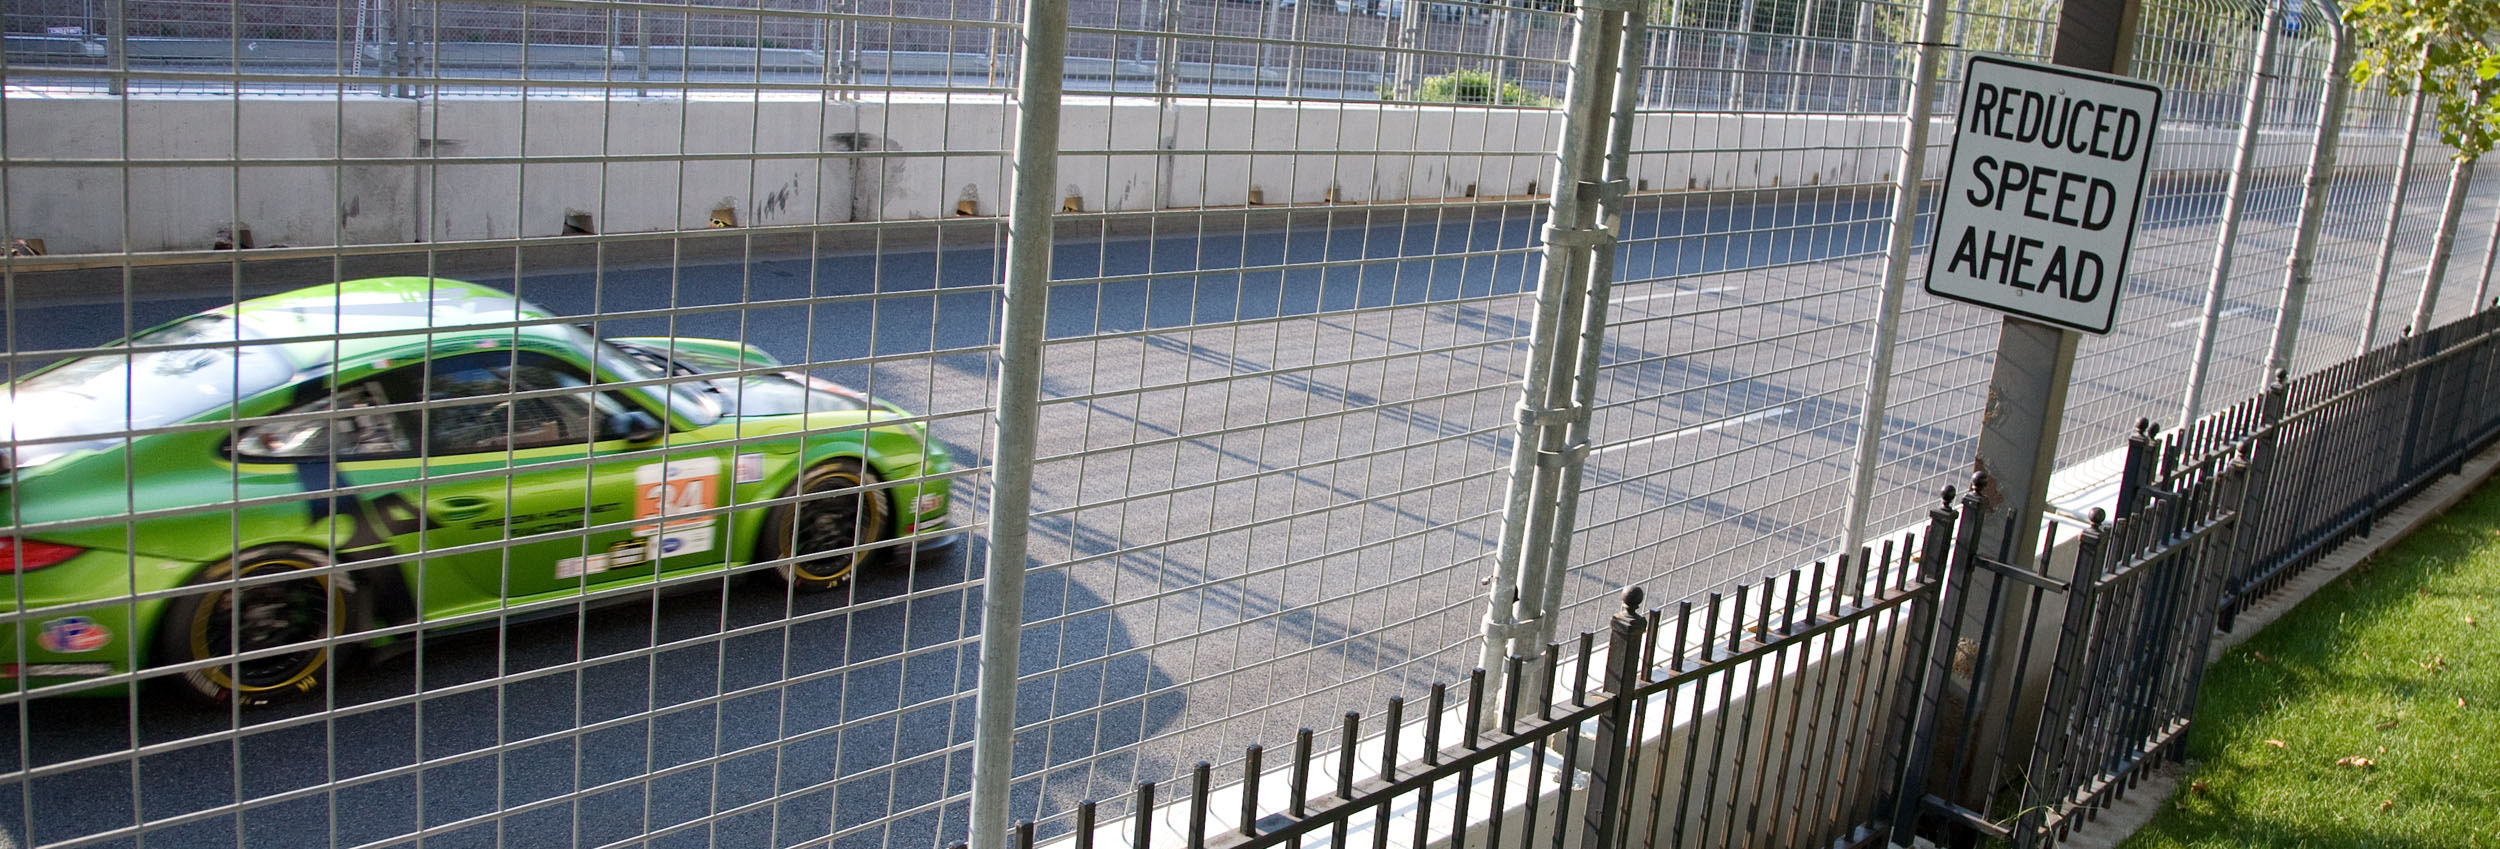 a green car is driving behind a fenced off area